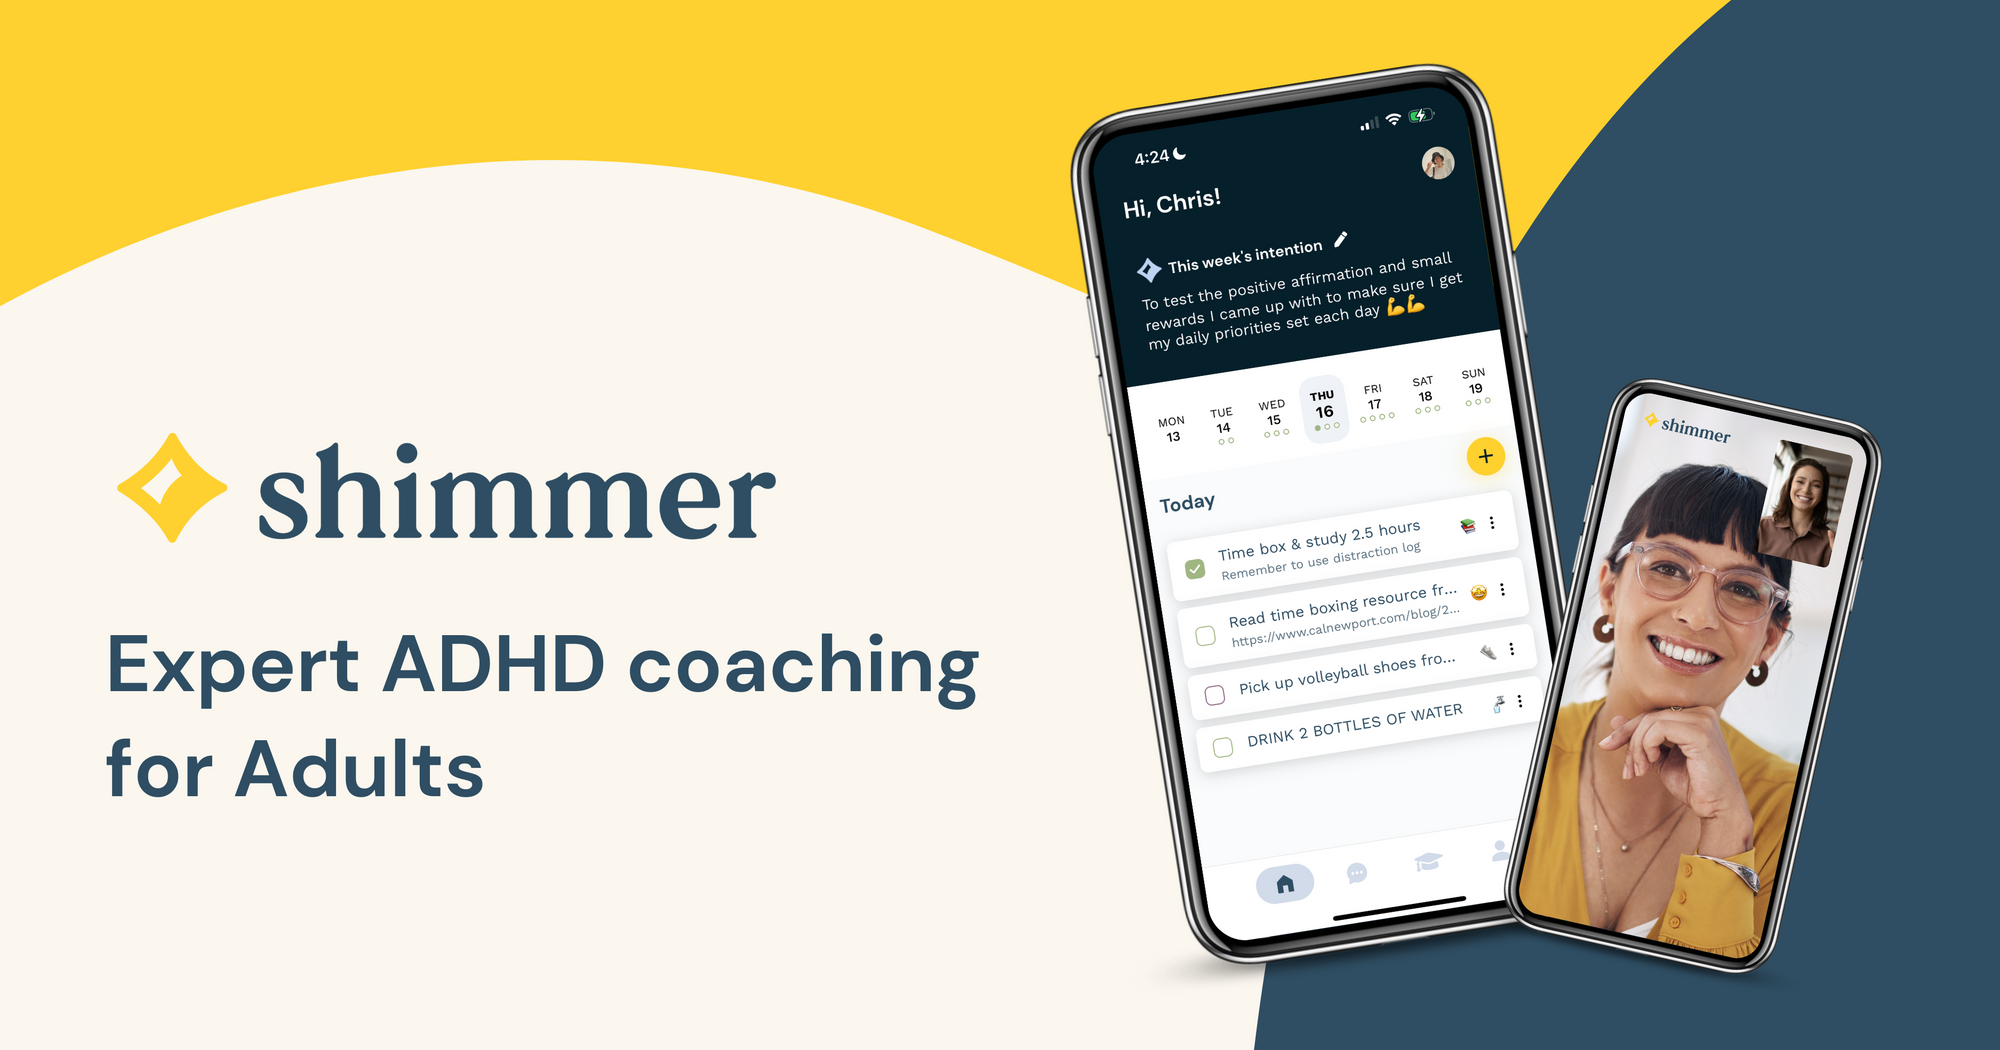 Shimmer - 1:1 ADHD coaching, 5-10X More affordable than alternatives